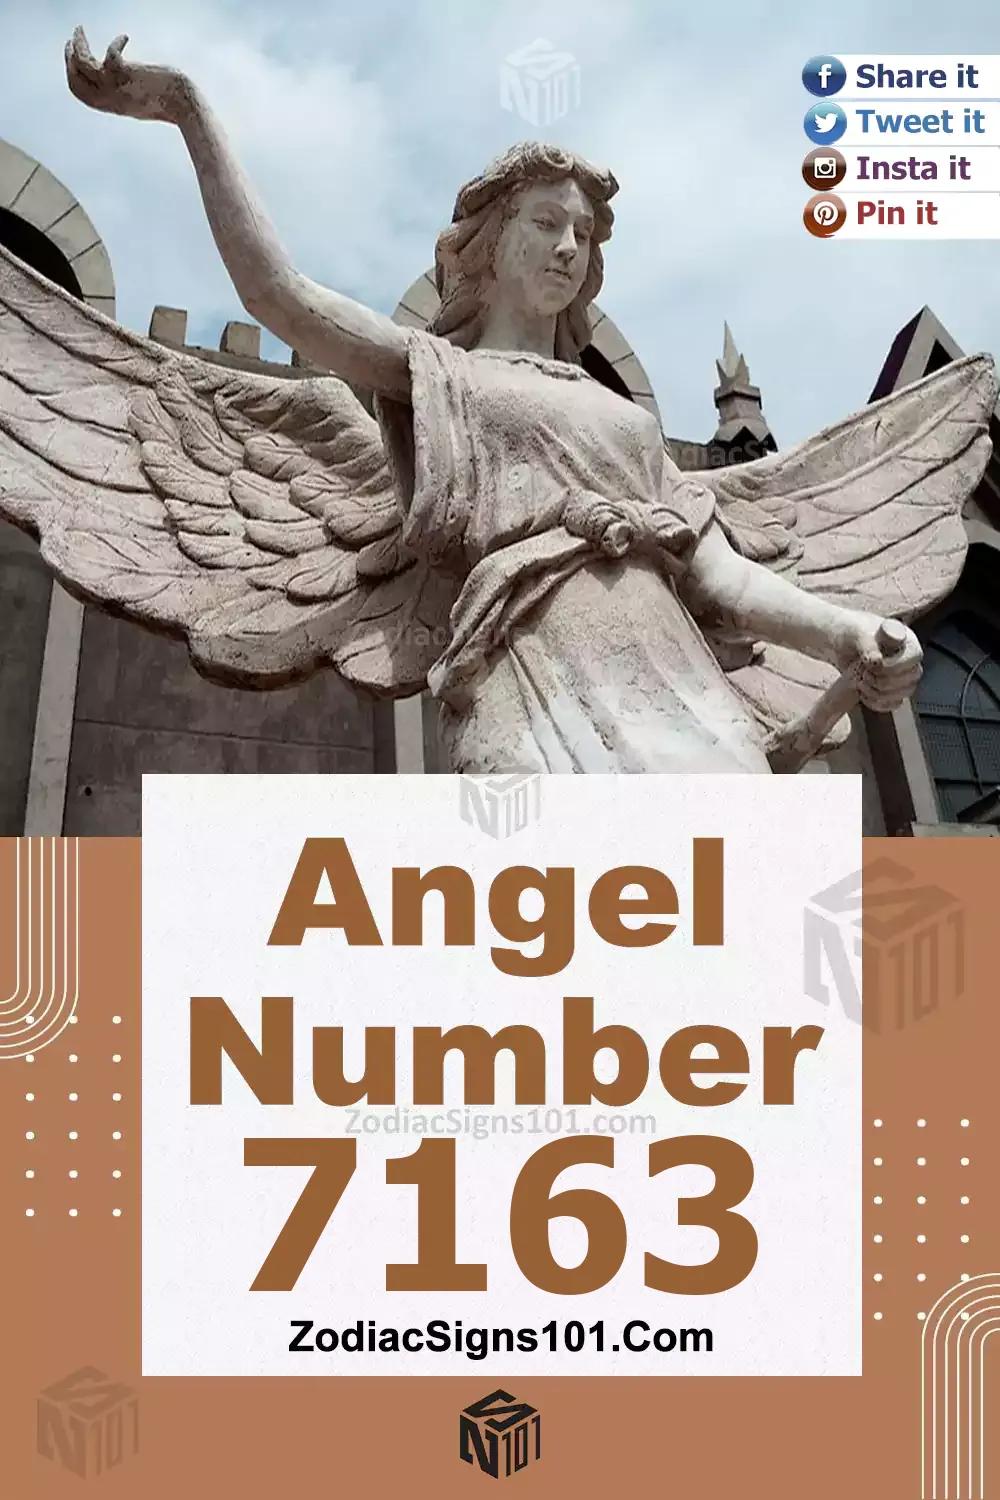 7163 Angel Number Meaning